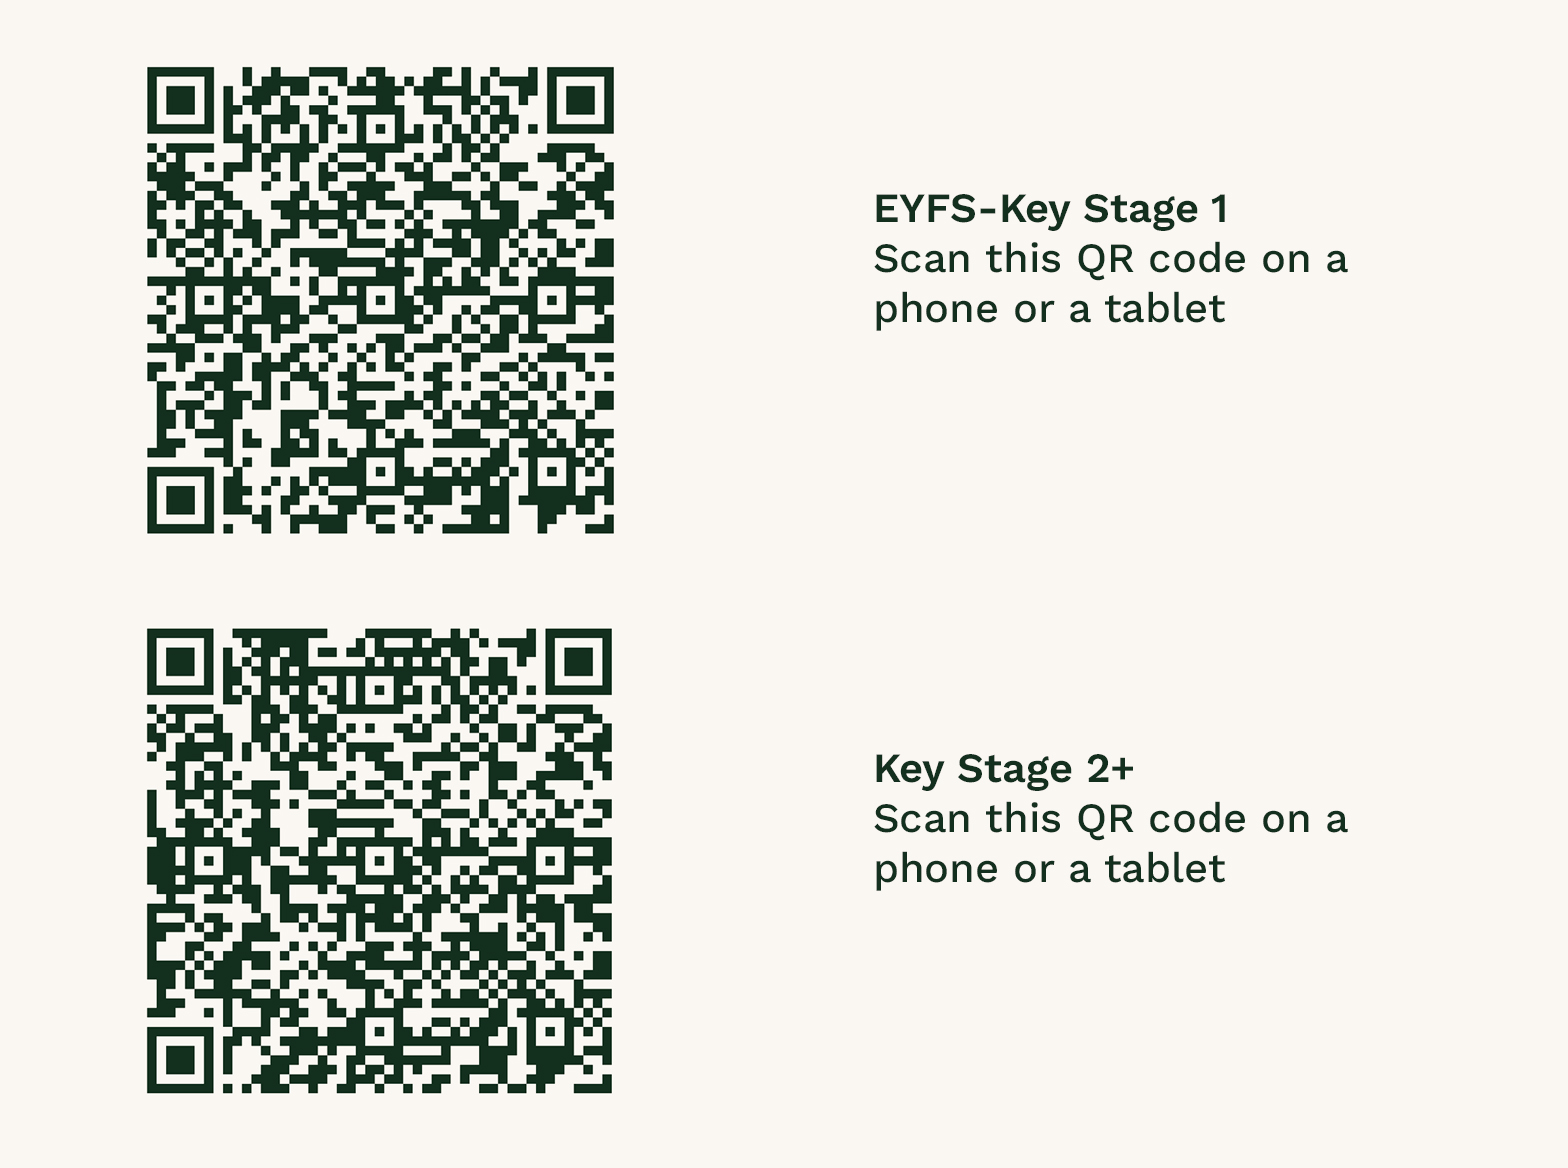 Two QR codes, one to open a EYFS-KS1 survey, and another for KS2+